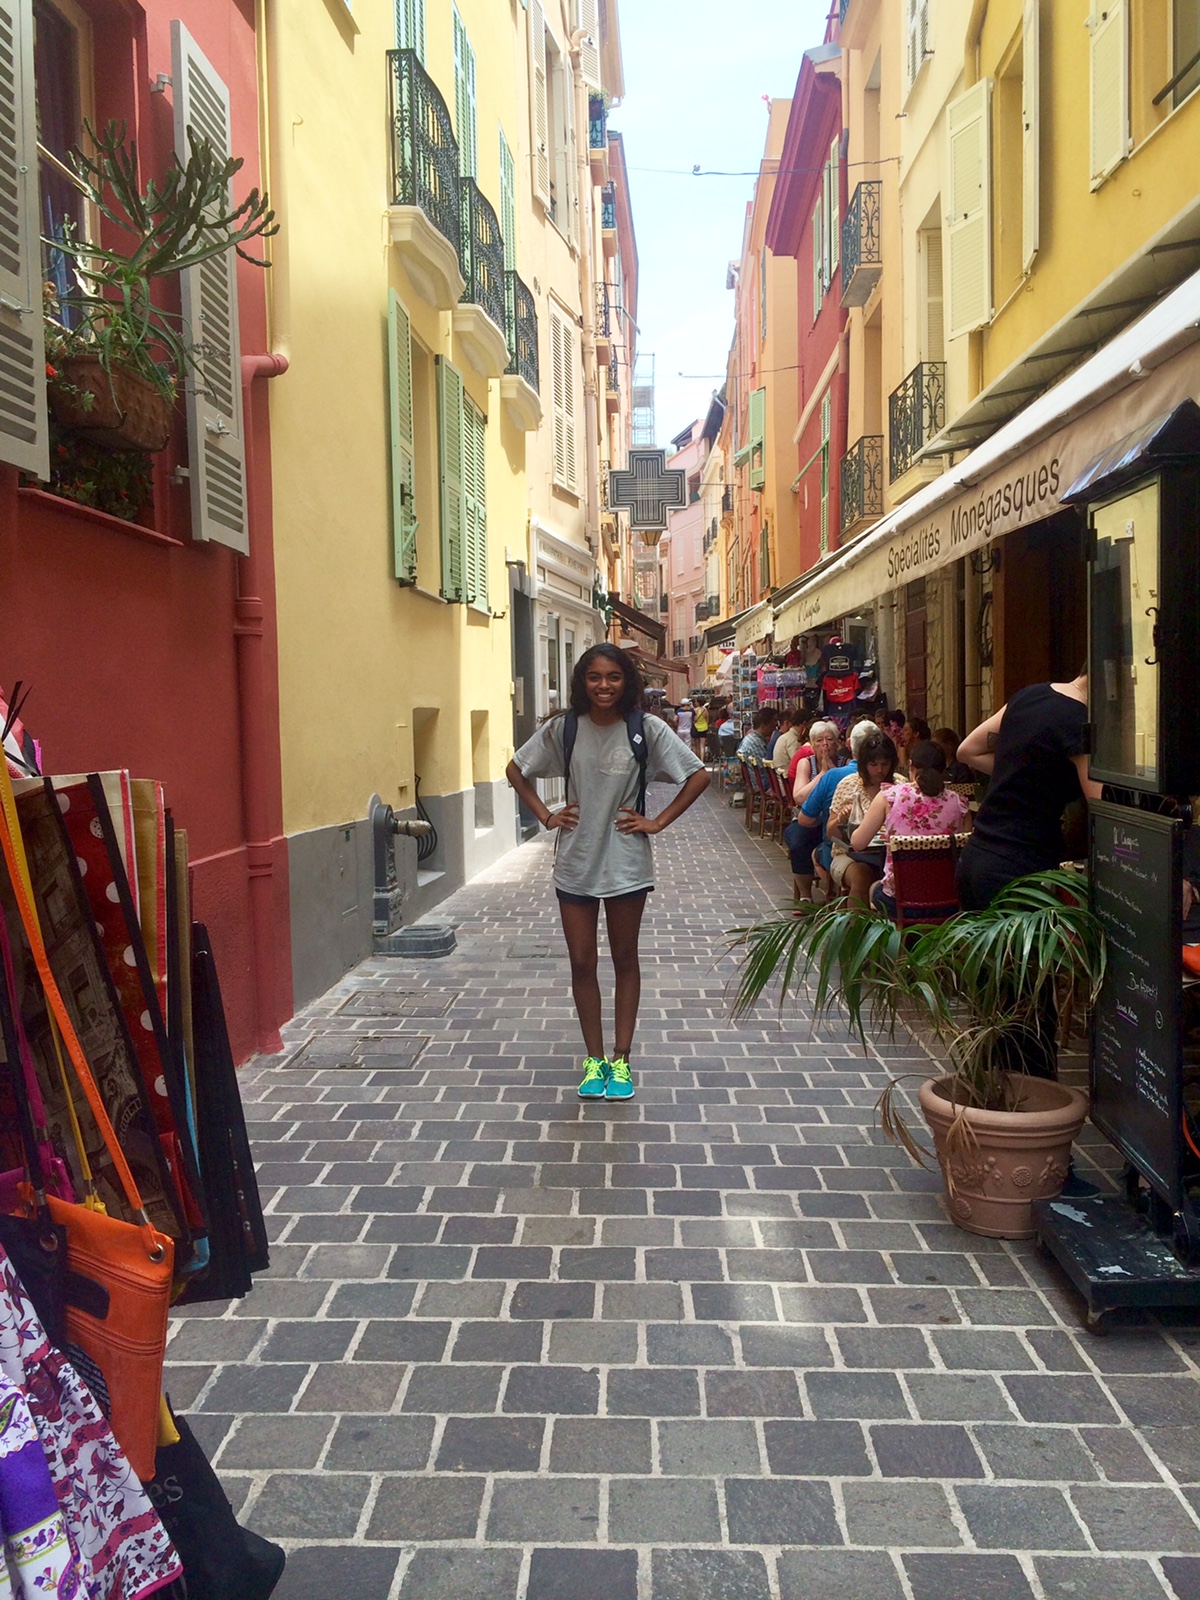 Student standing in front of colourful shop facades on a narrow side street in Spain.